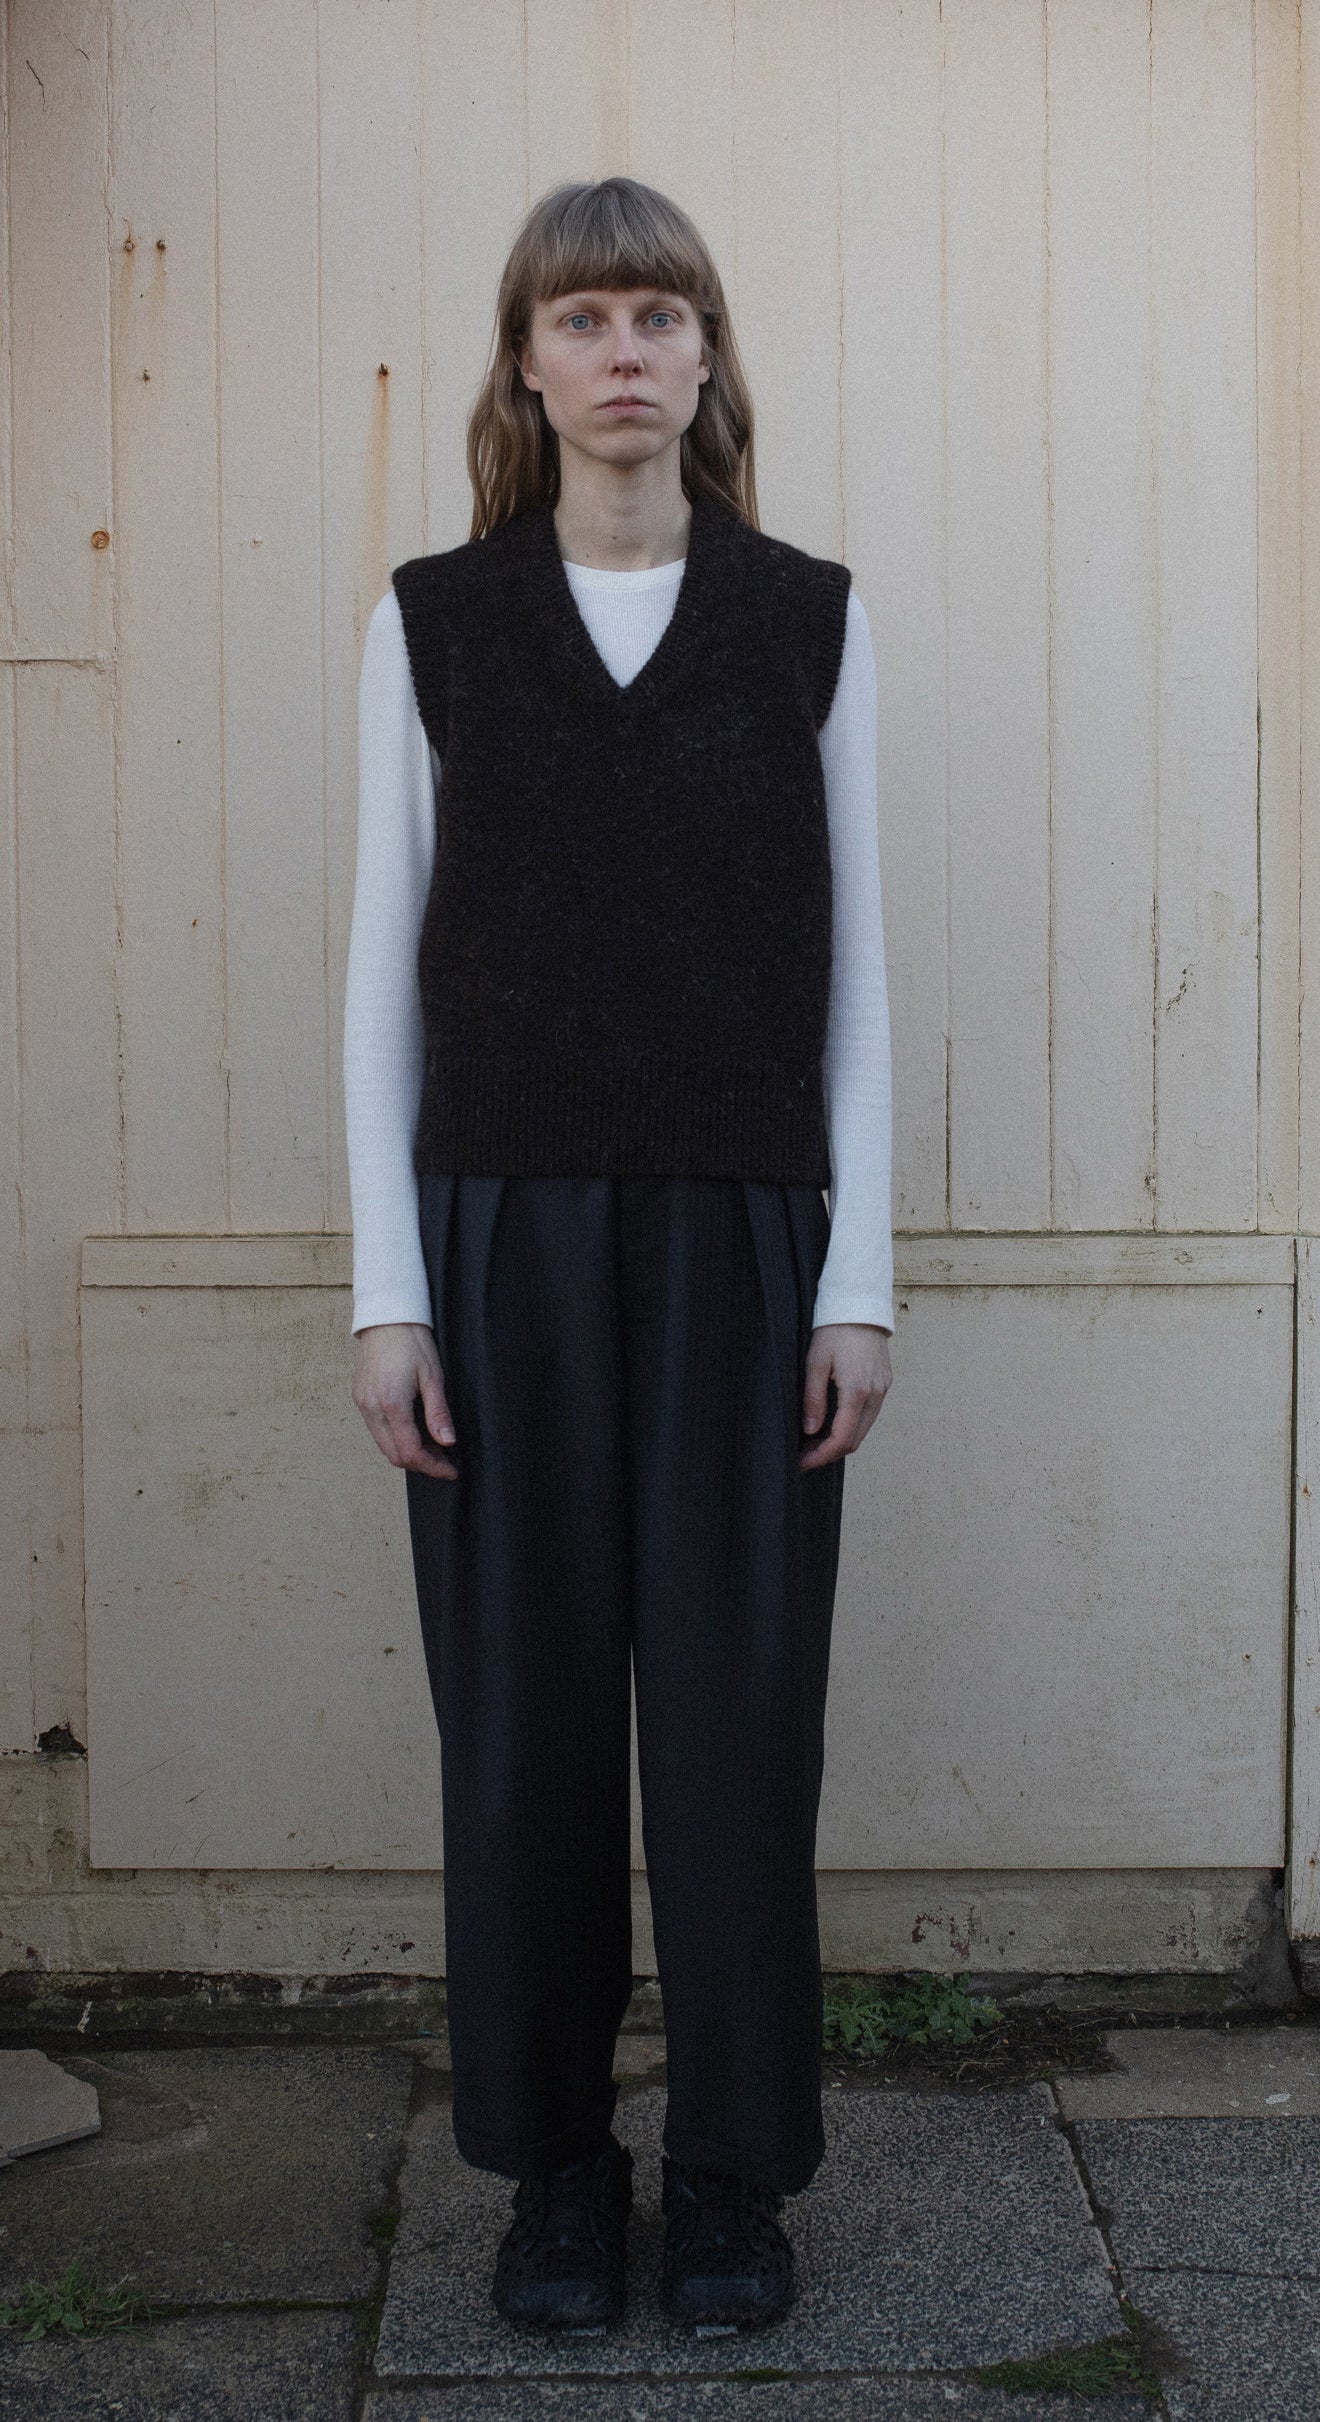 Double Pleat Trousers - Cacao Wool